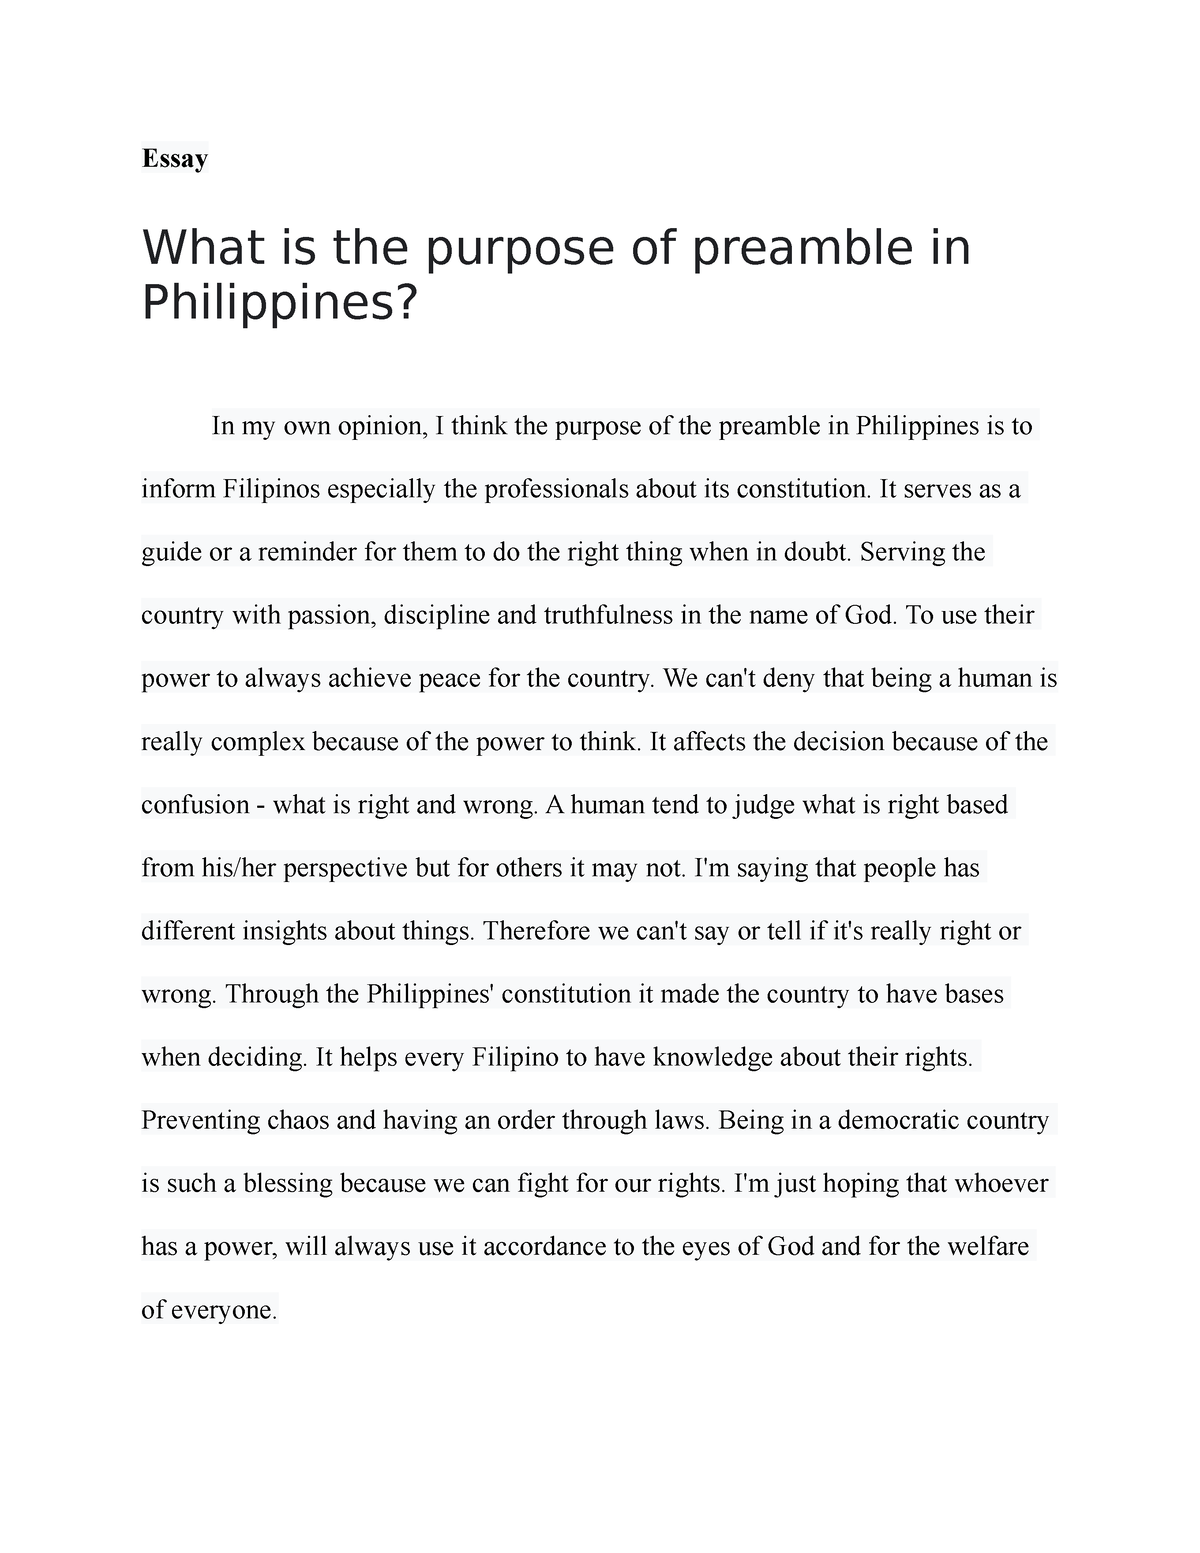 essay-what-is-the-purpose-of-preamble-in-philippines-essay-what-is-the-purpose-of-preamble